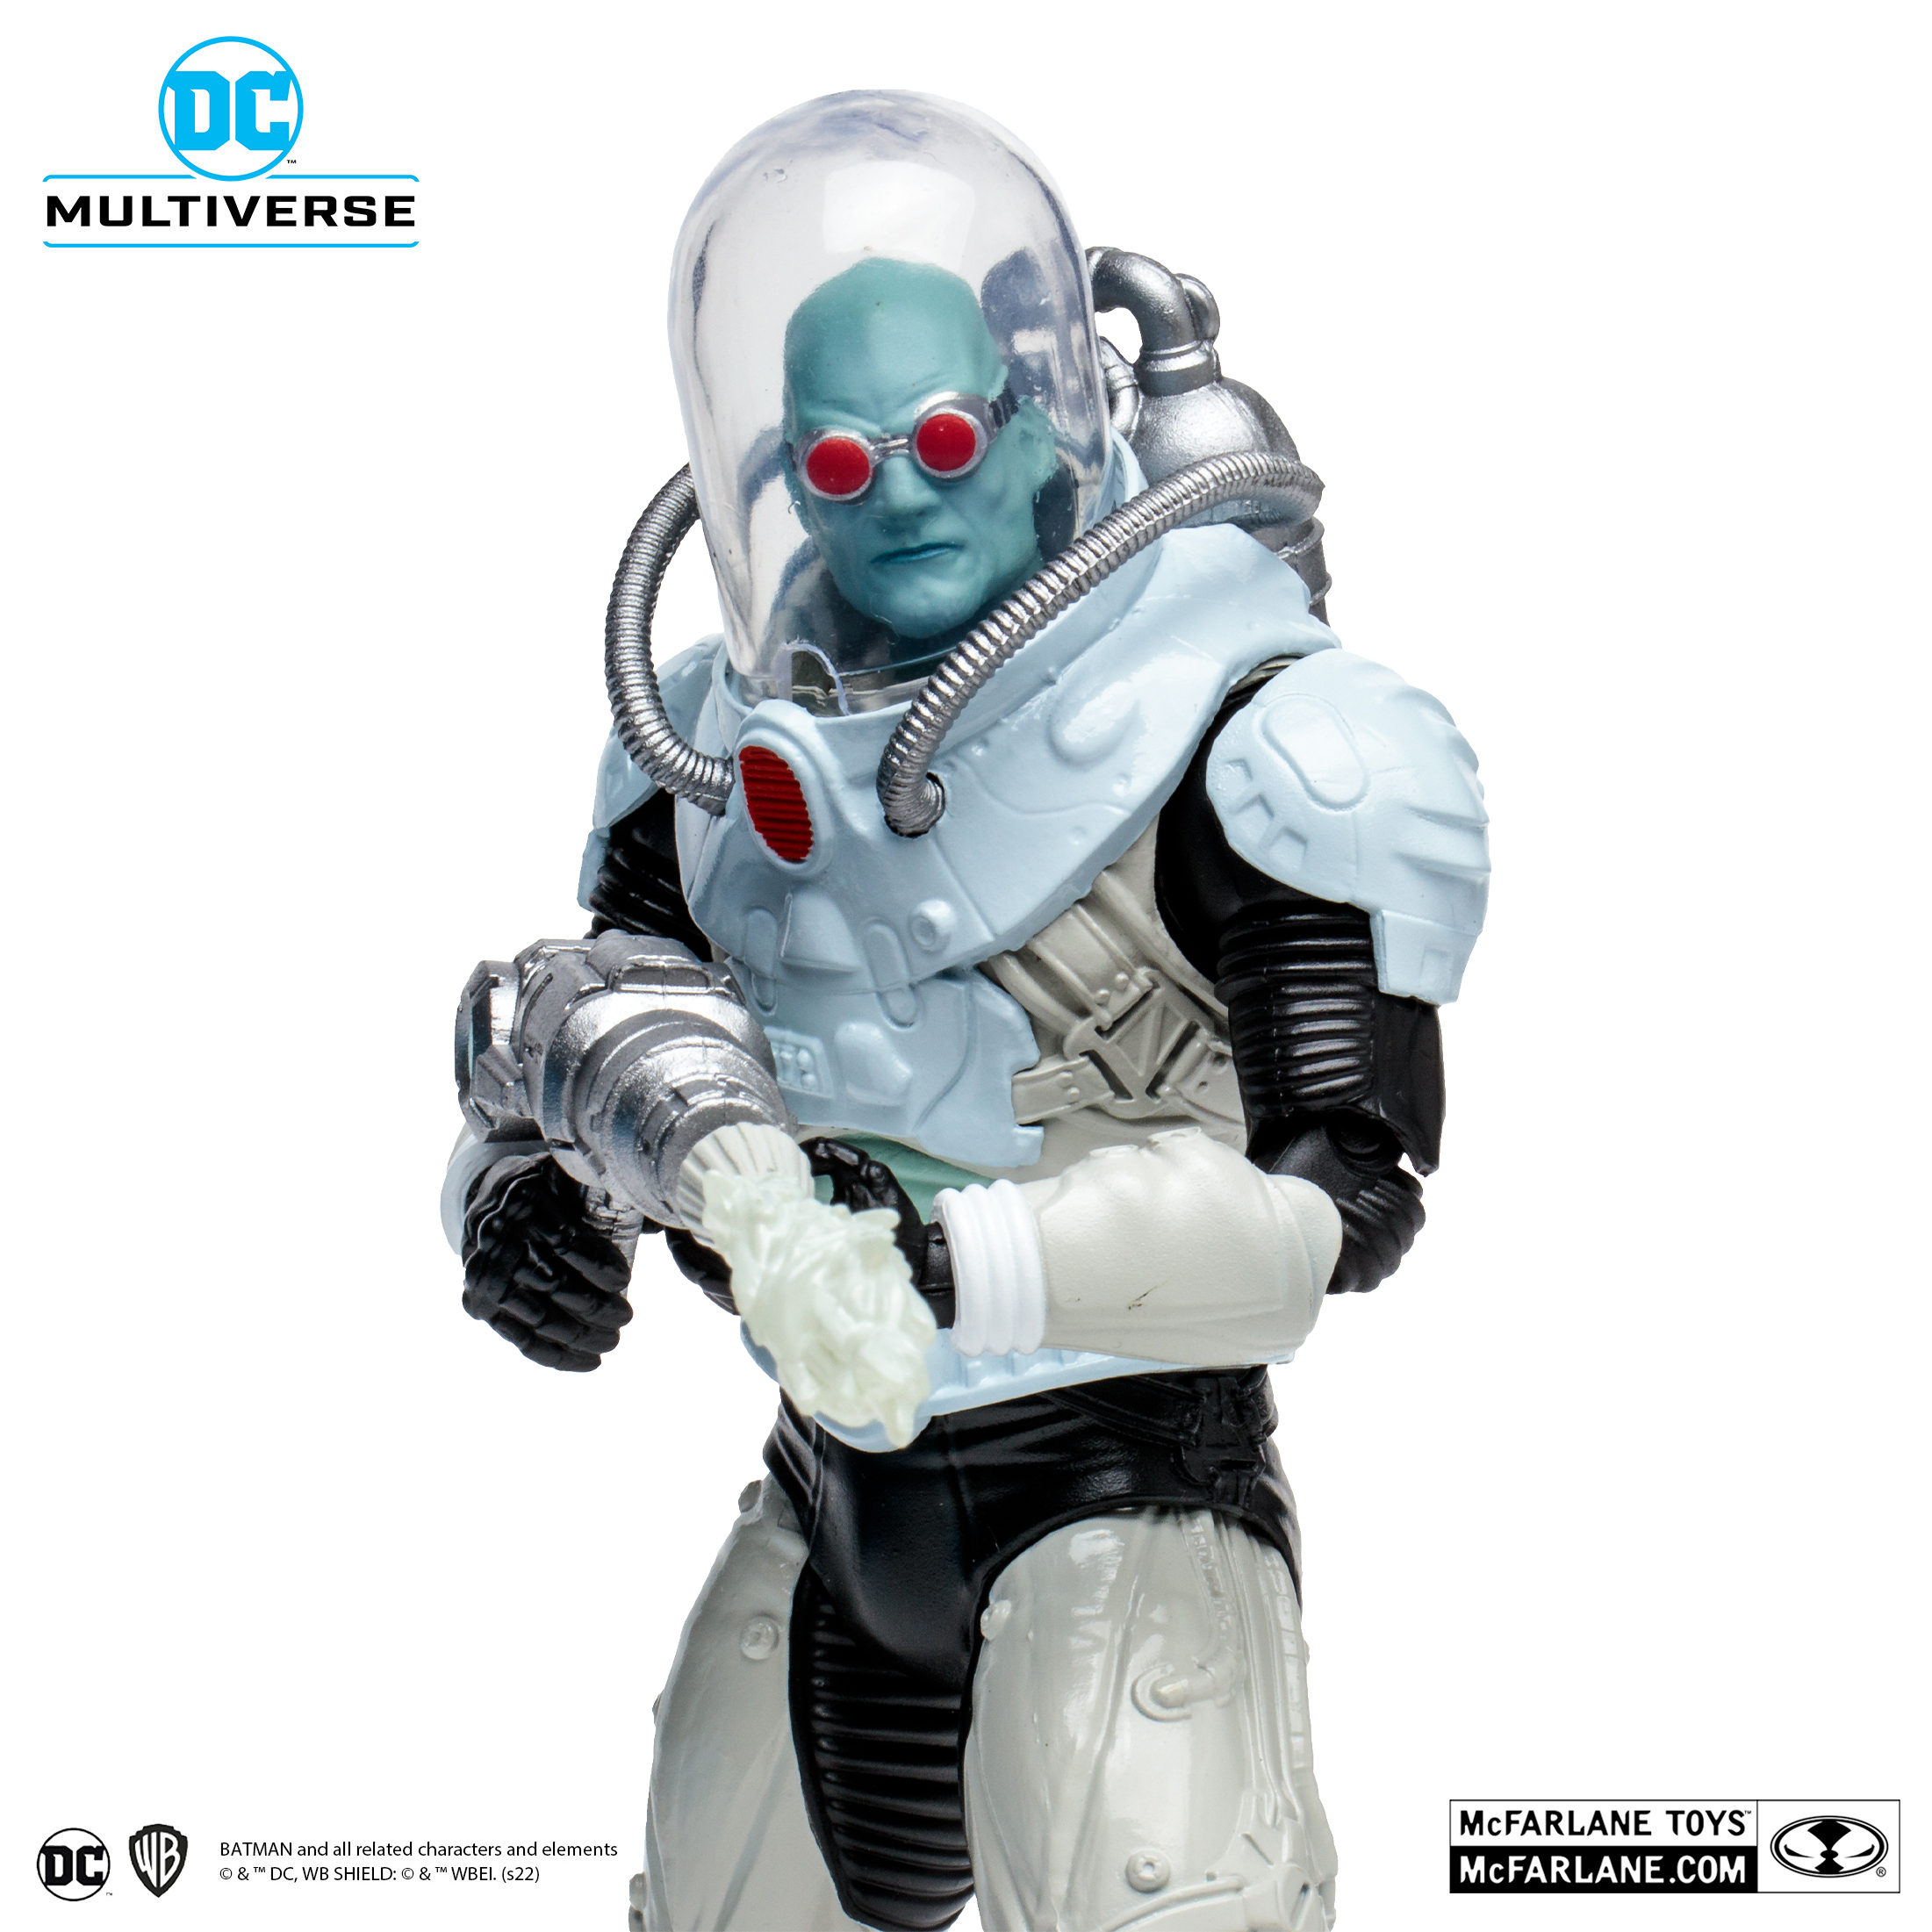 McFarlane Toys - Chill out. Here is a FIRST LOOK at our Mister Freeze 7  scale figure. Coming soon! ⁠ #McFarlaneToys #DCMultiverse #MisterFreeze